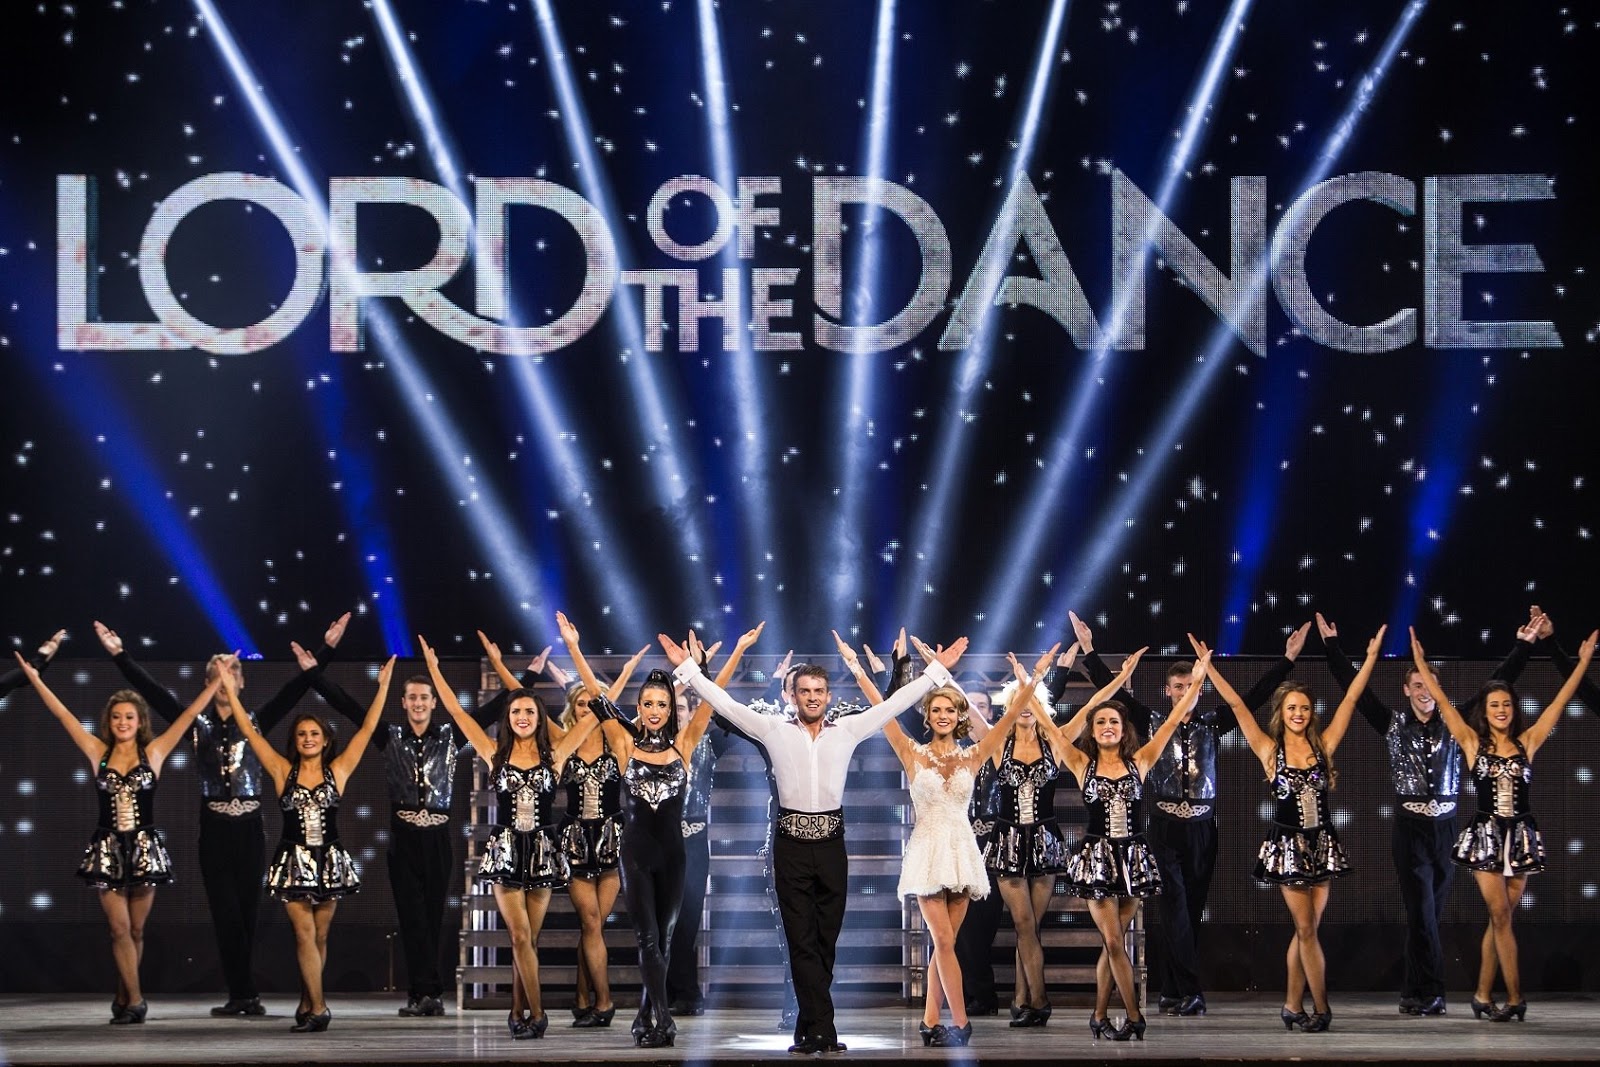 Lord of the Dance Review